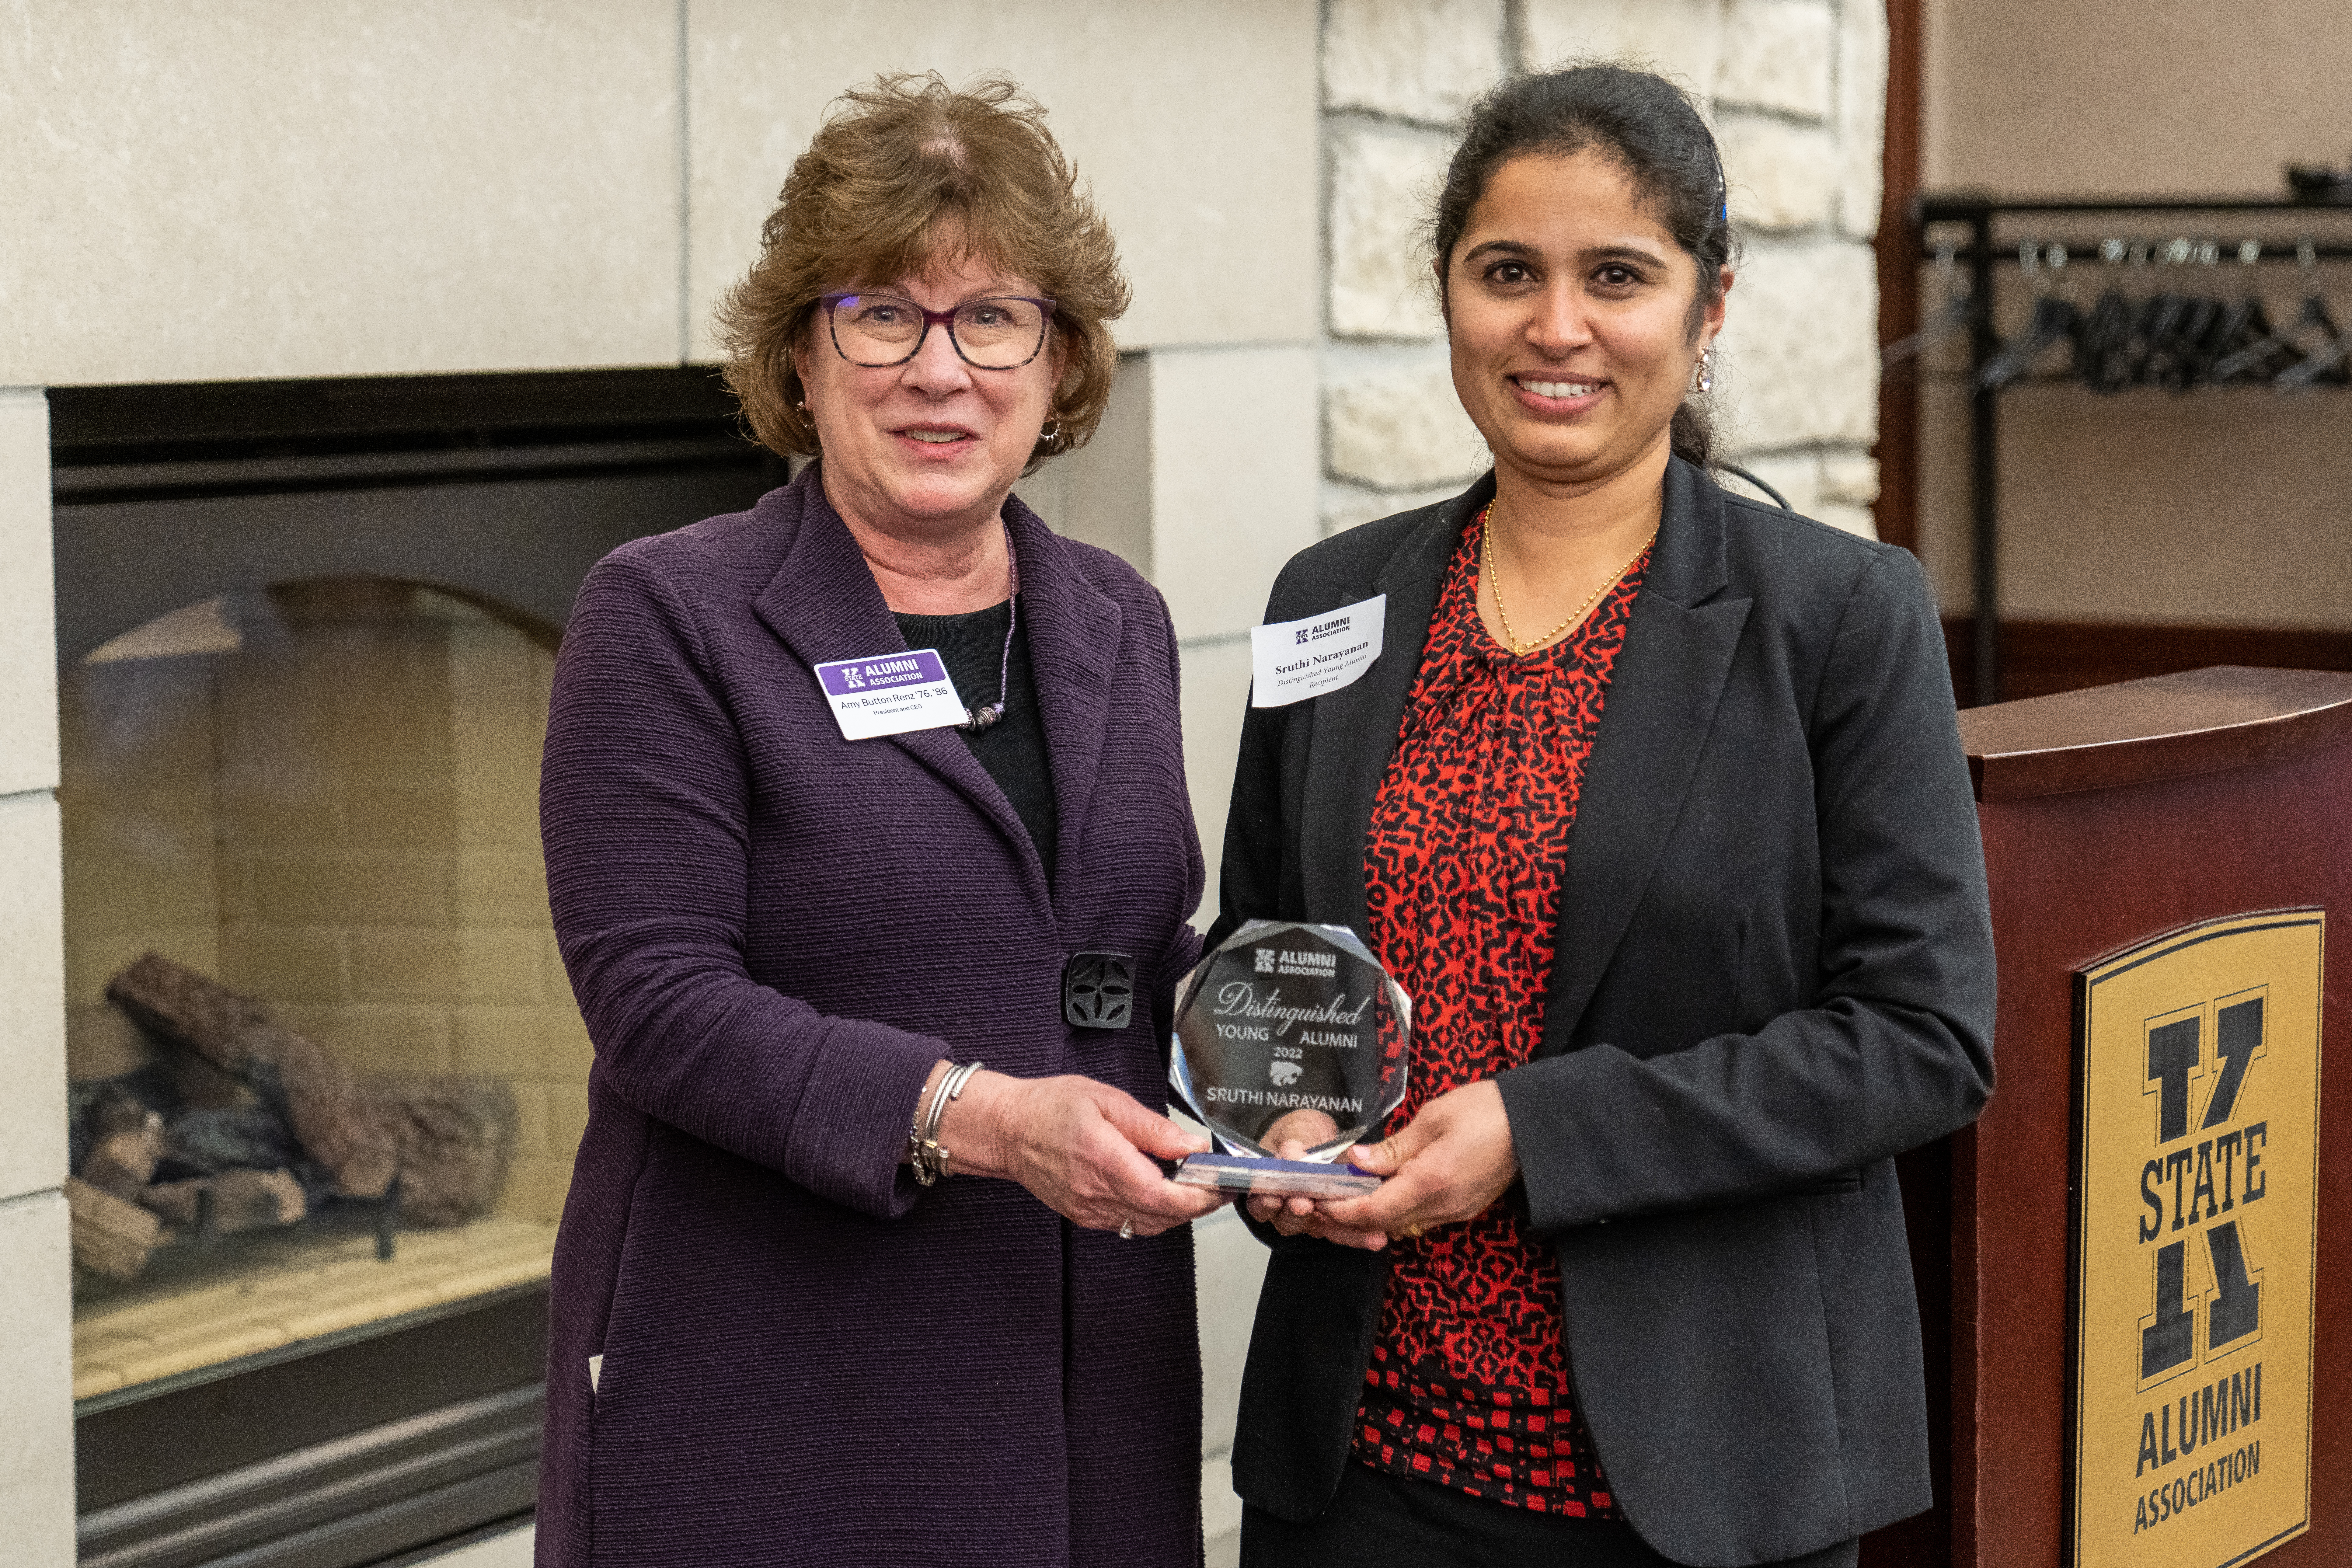 Amy Button Renz, president and CEO of the Kansas State University alumni association, presents Sruthi Narayanan, a Clemson assistant professor of crop physiology, with the university's 2022 Distinguished Young Alumni Award.